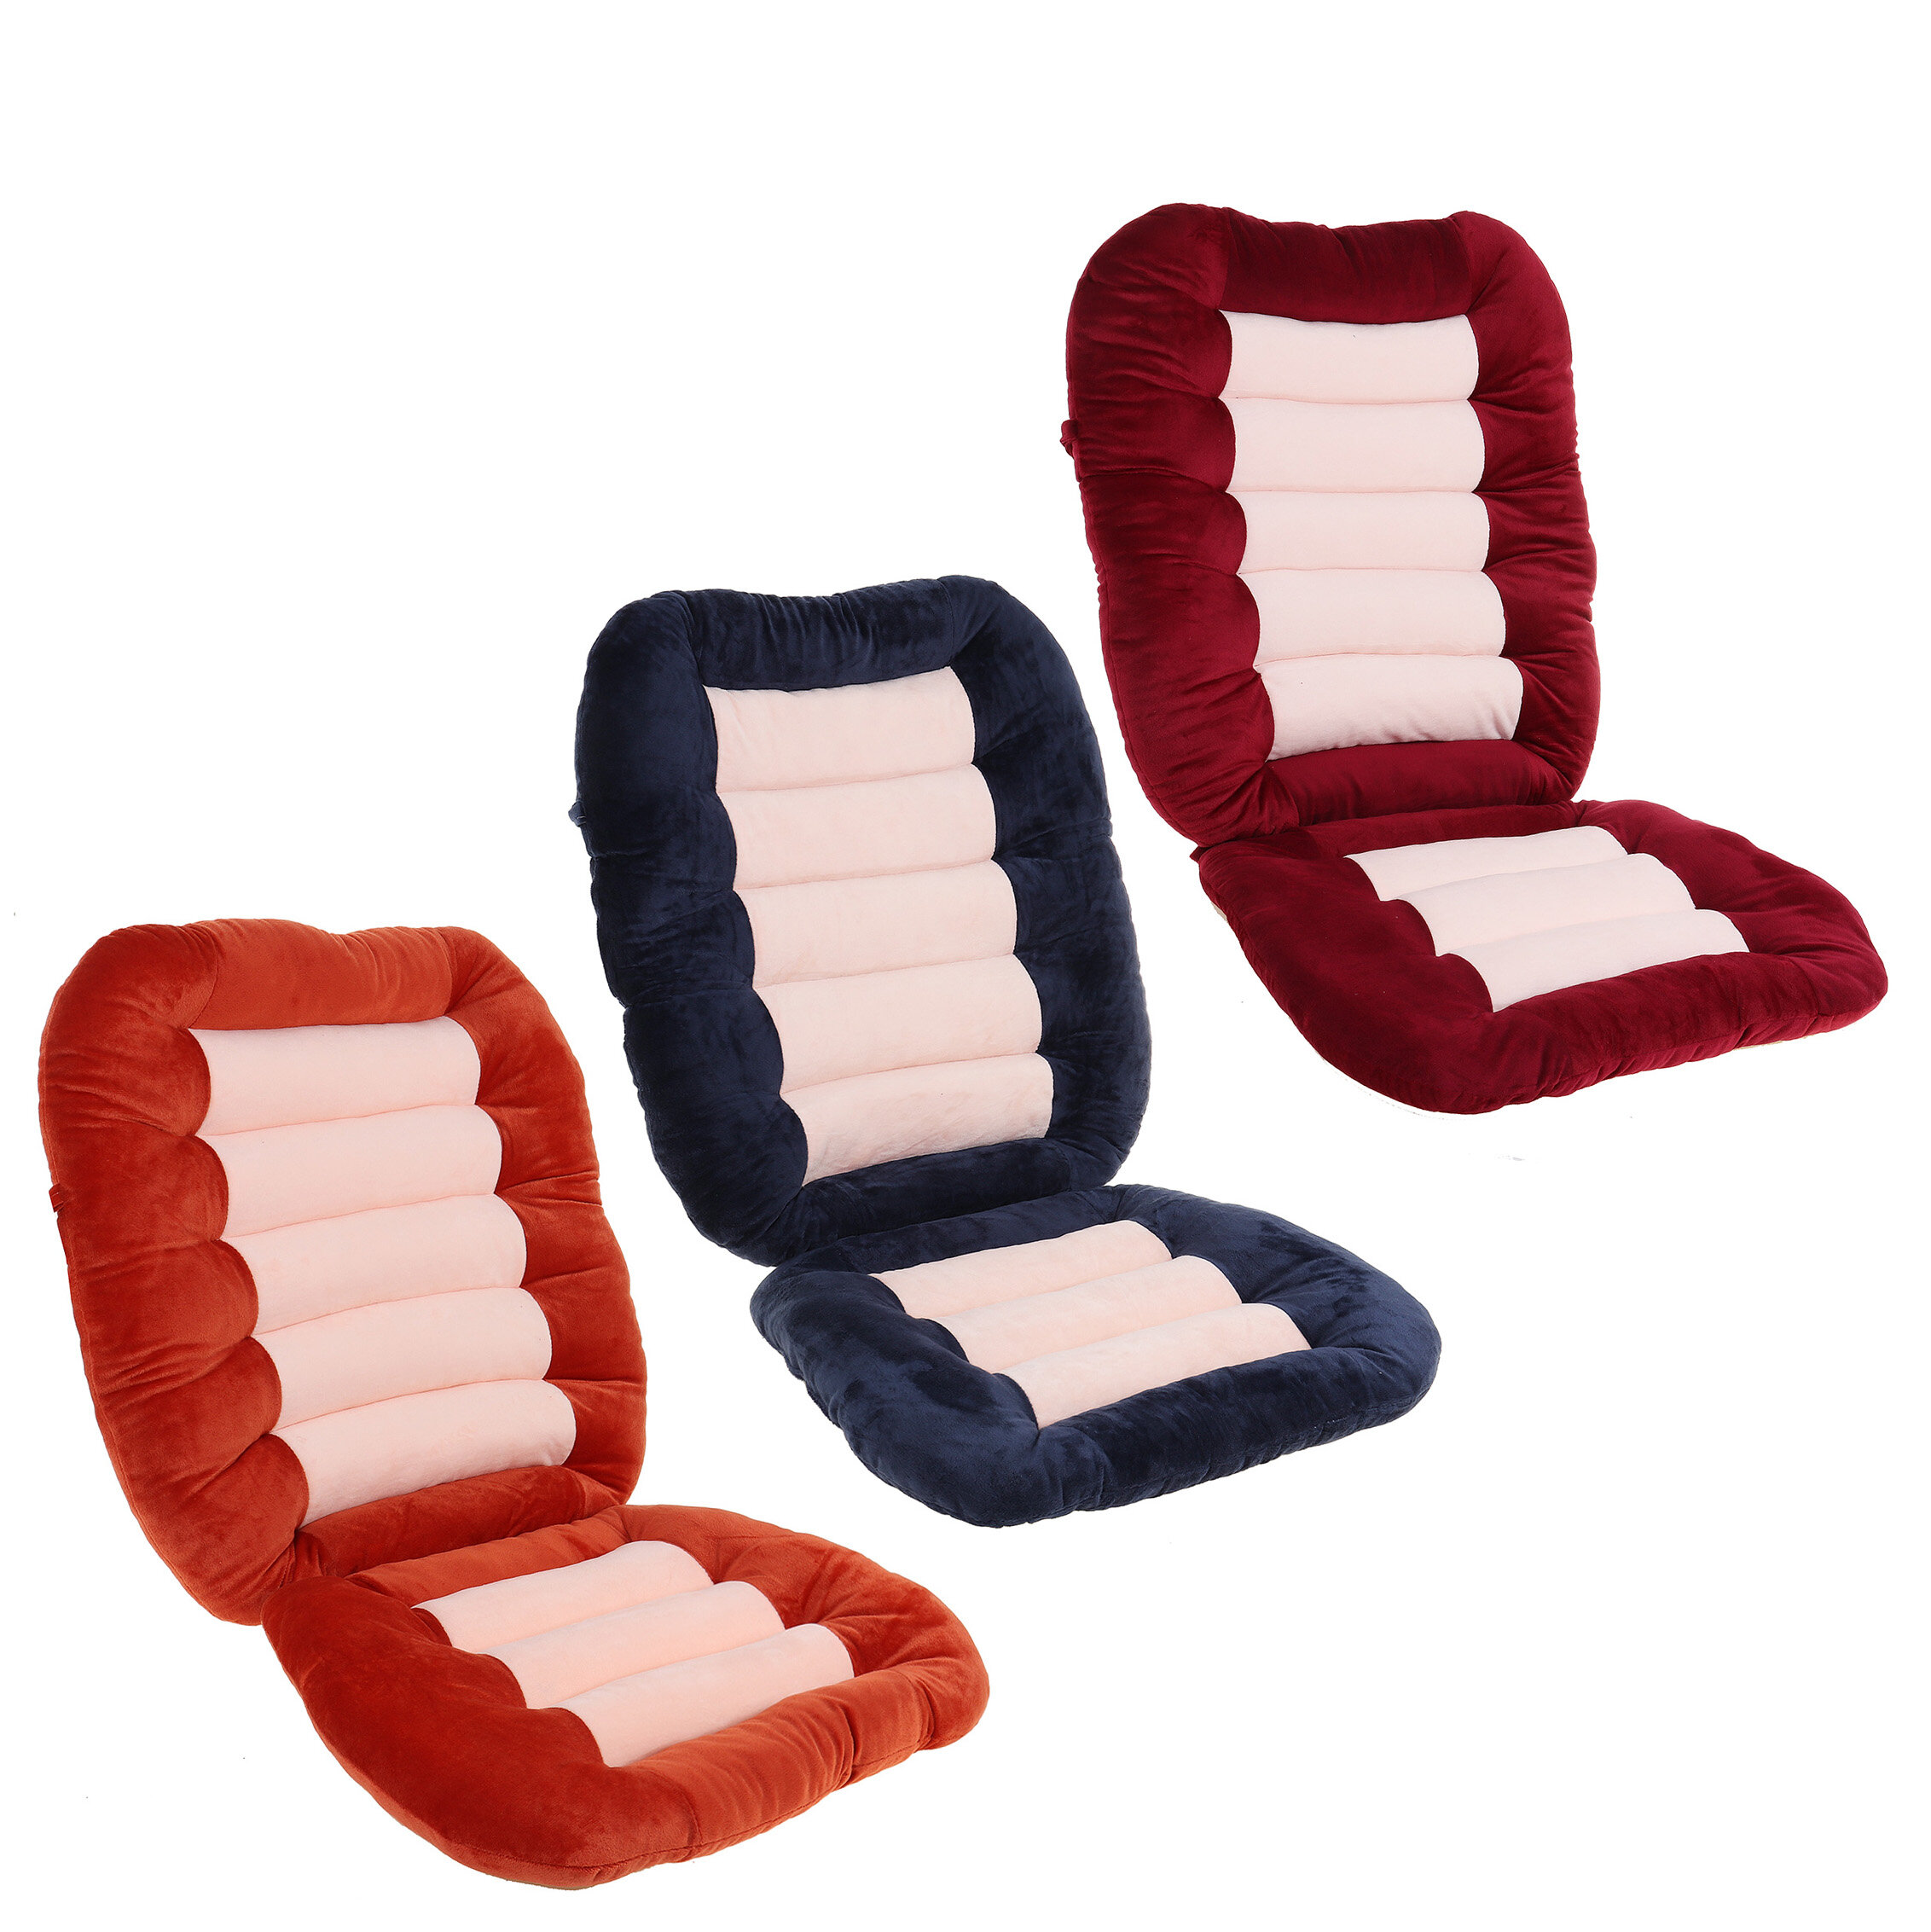 Foldable Dining Garden Patio Office Soft Antiskid Chair Seat Back Pads Cushion for Home Supplies